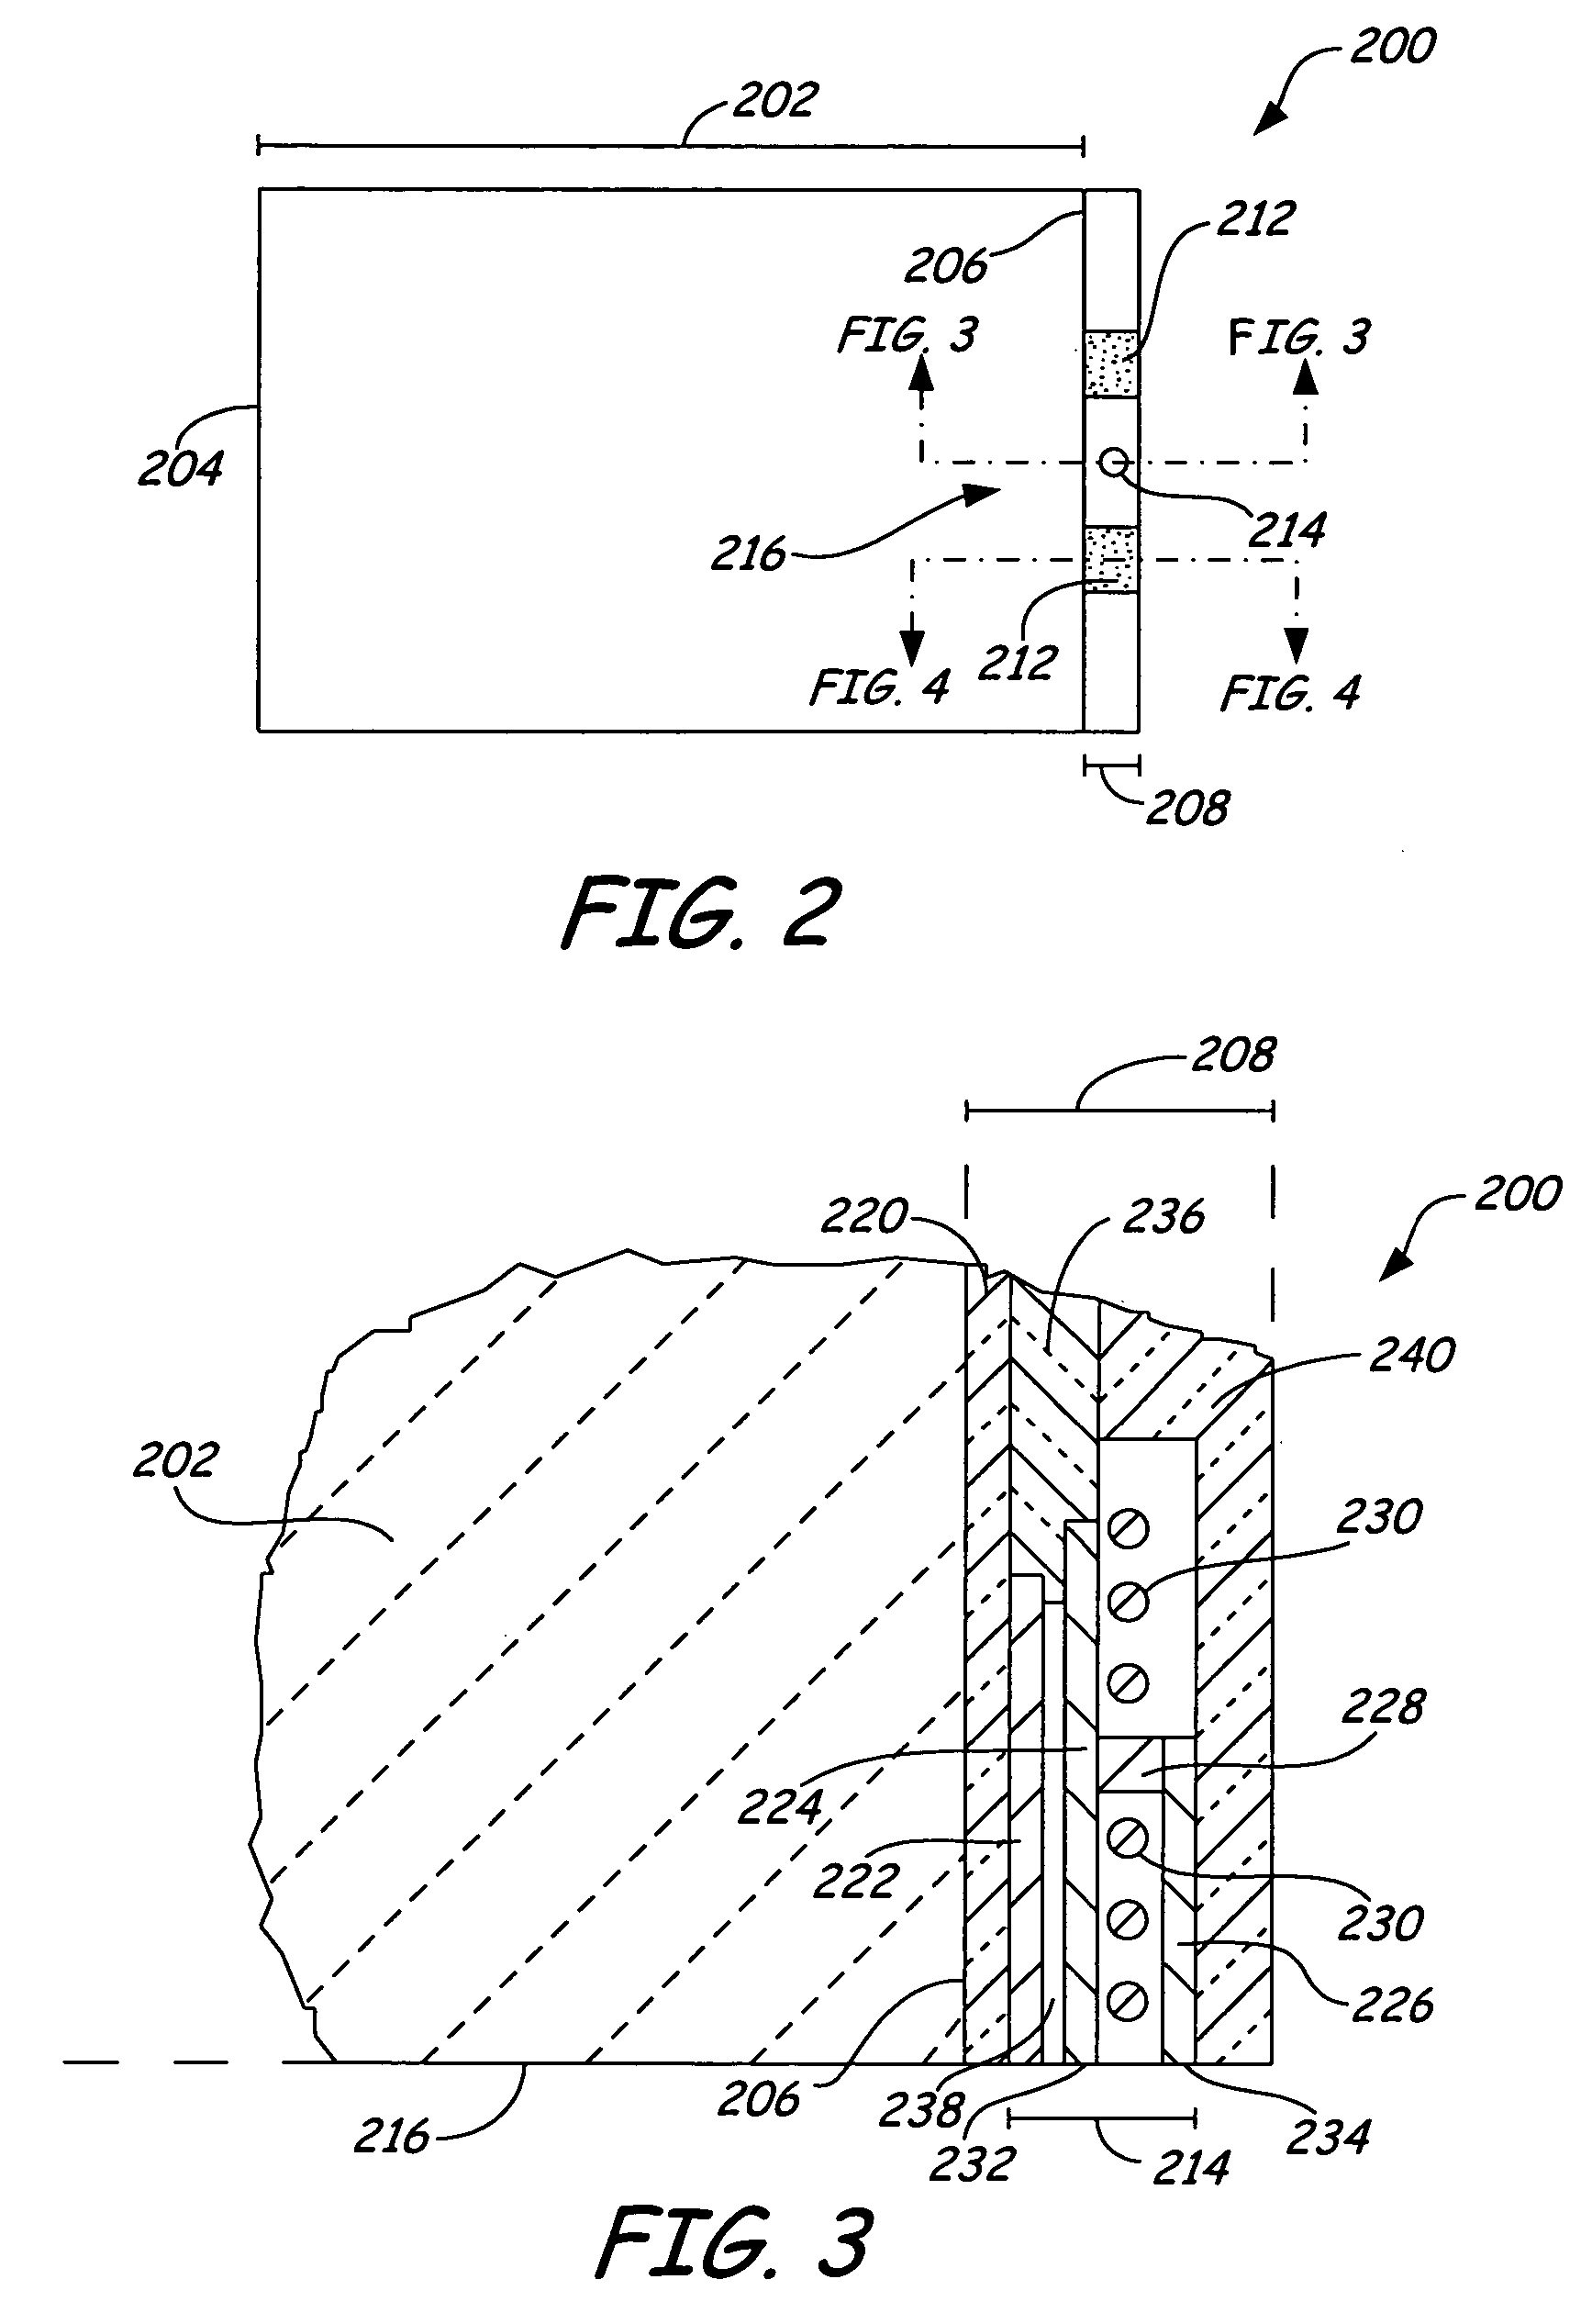 Slider with transducing and heating elements formed on trailing end thereof and sharing same thin film structure